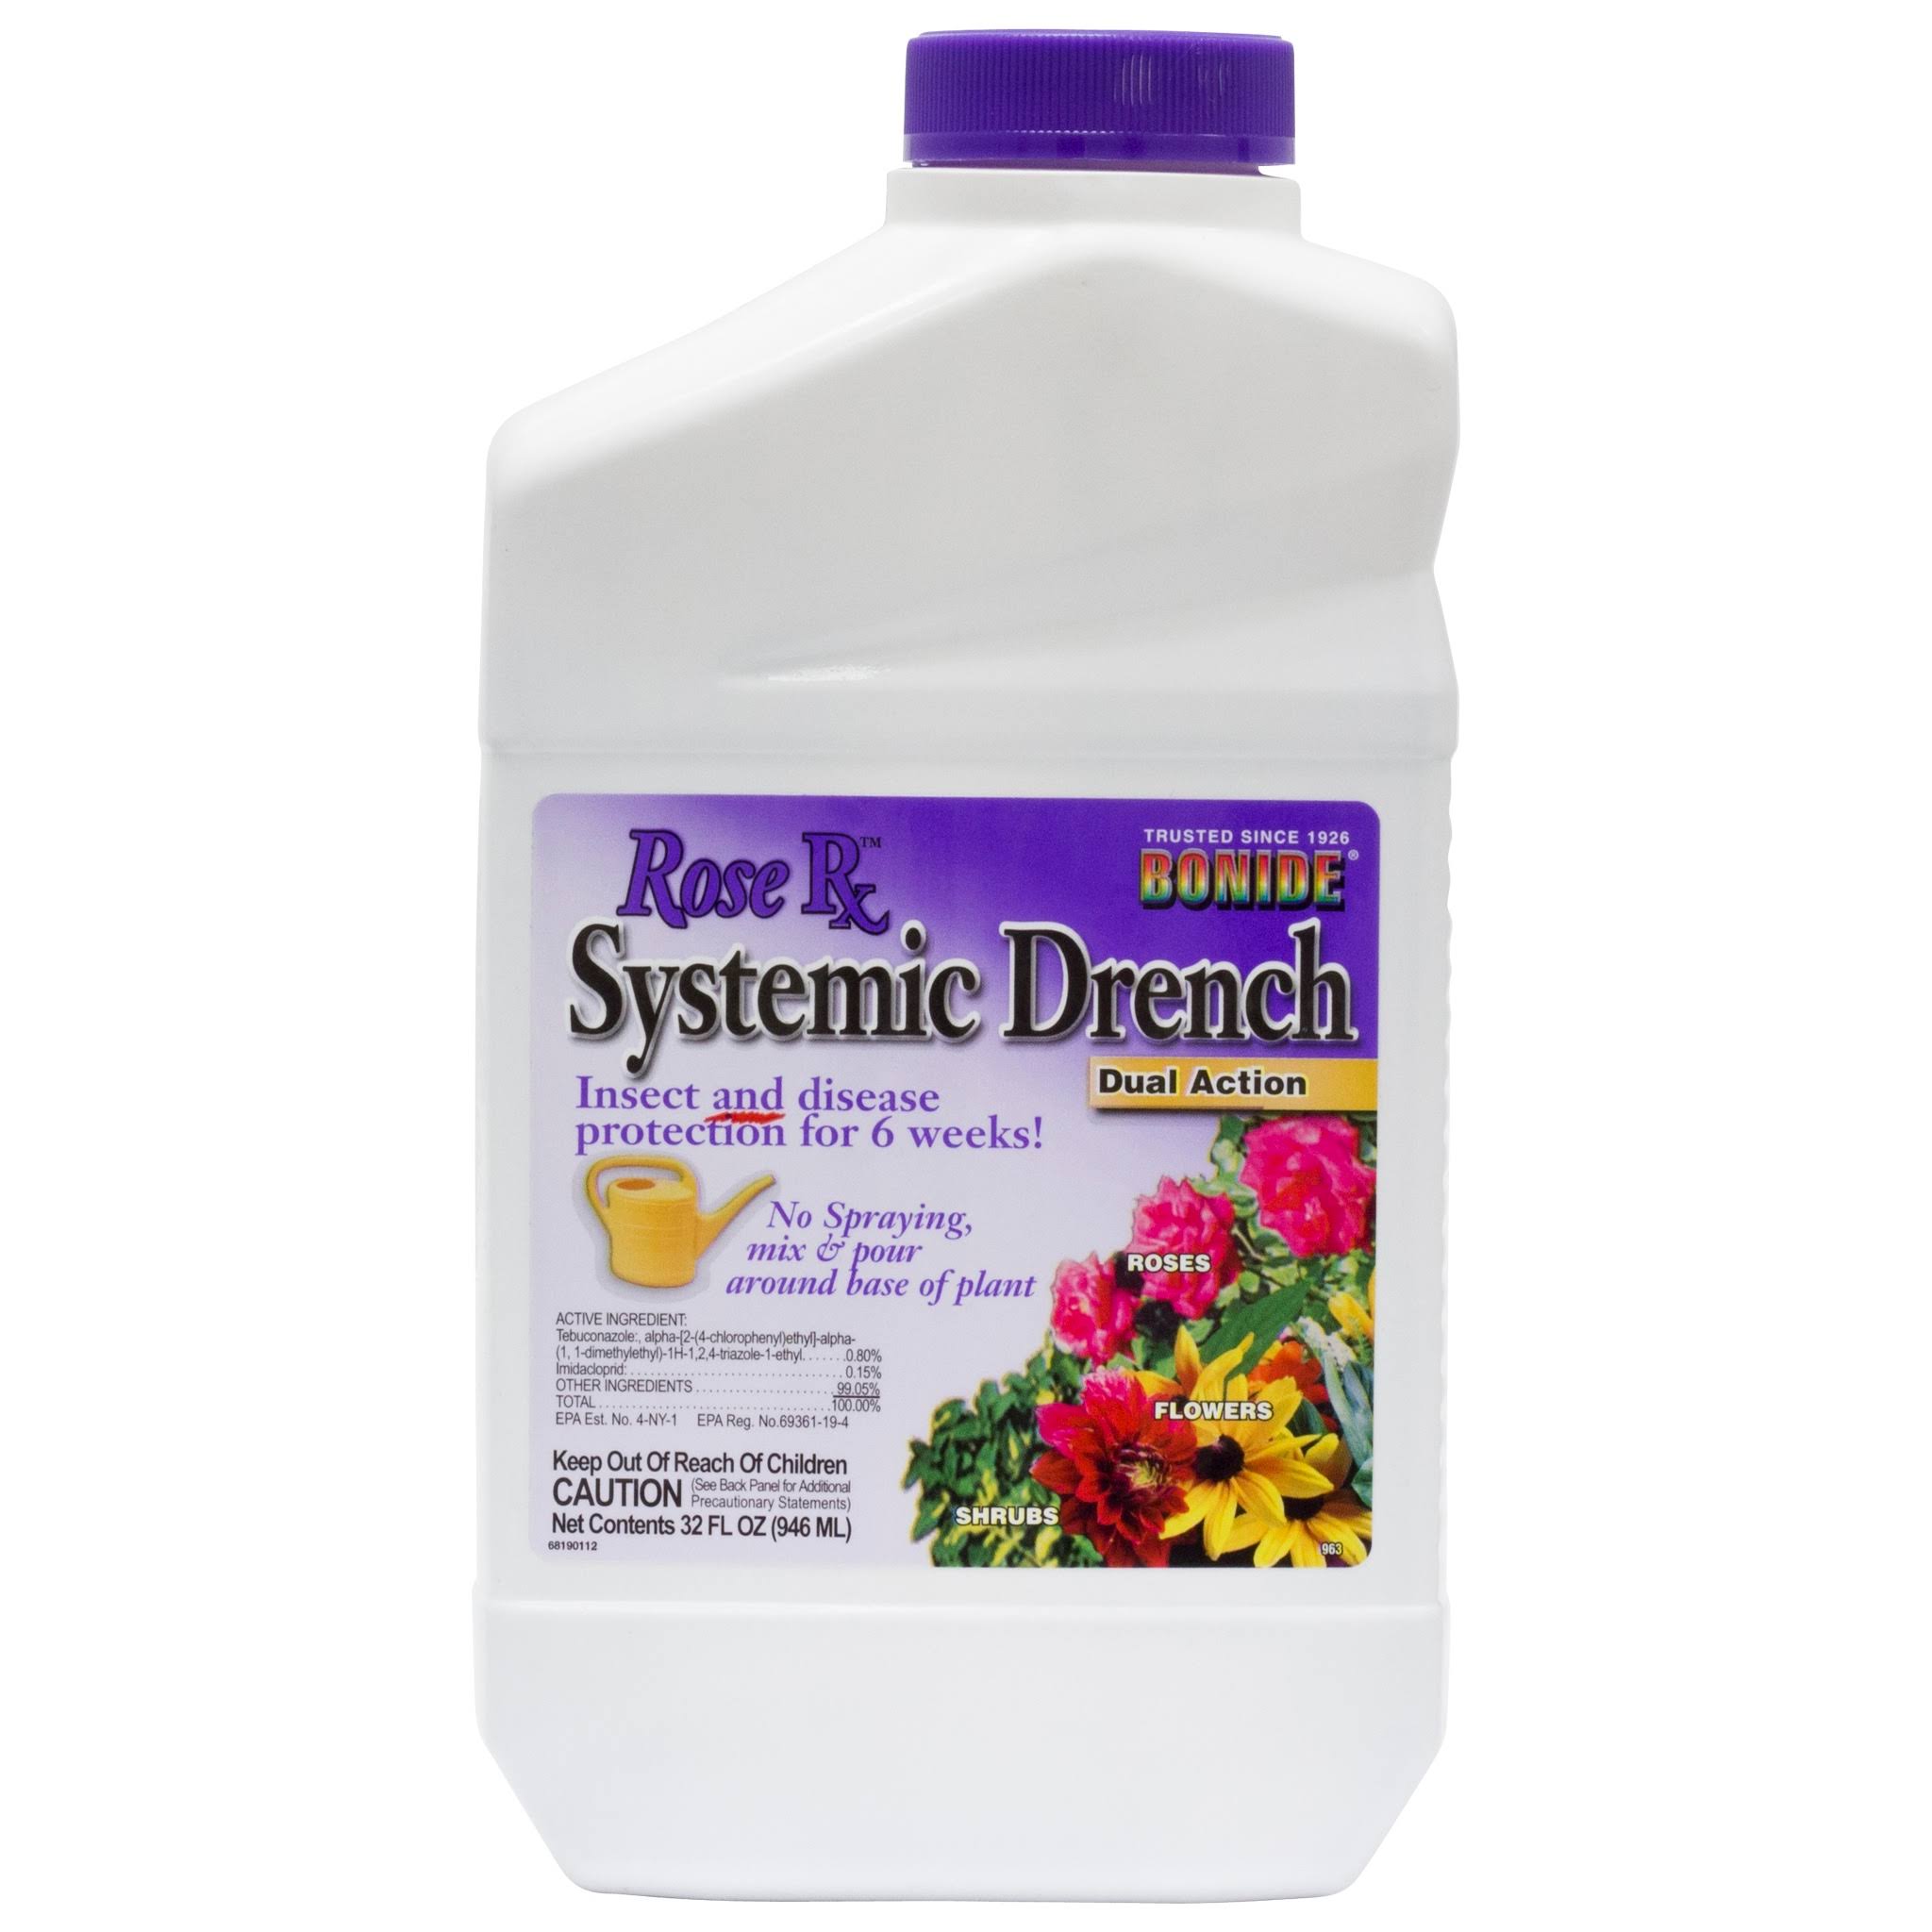 Bonide Products Concentrate Rose Drench for Insect Control - 1qt